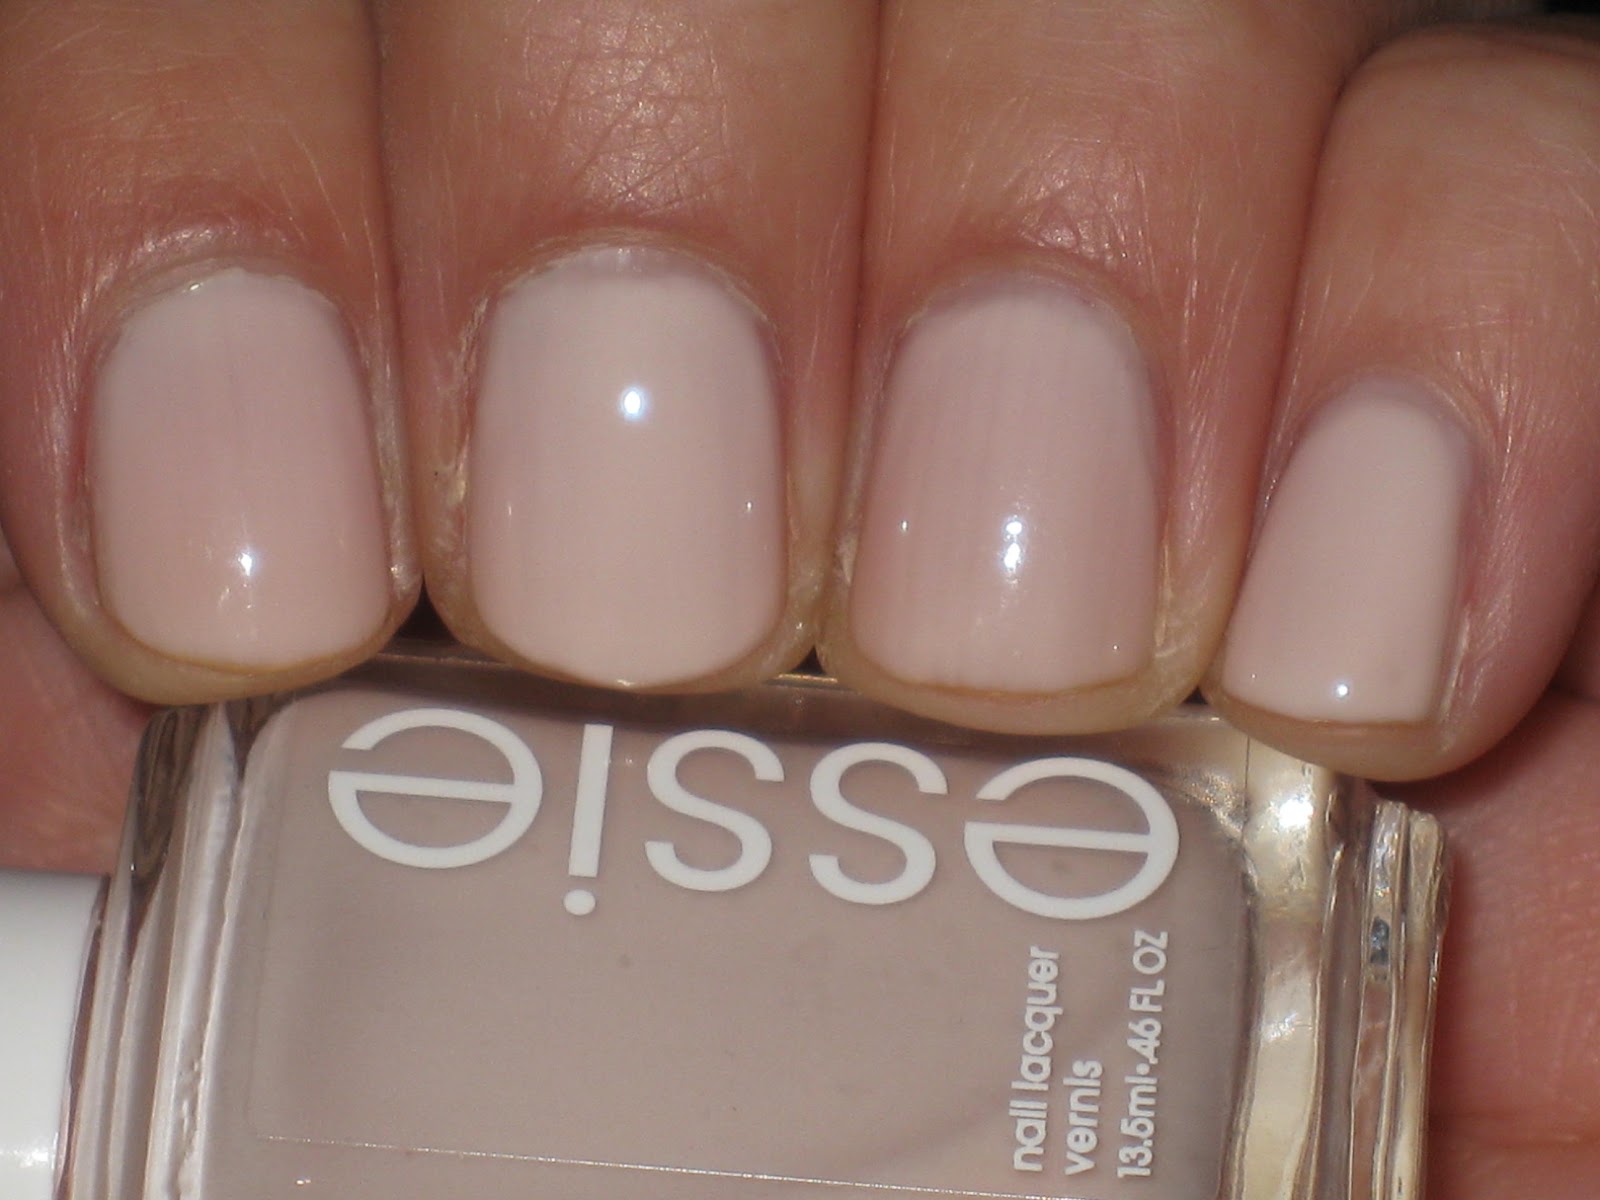 2. Essie Nail Polish in "Ballet Slippers" - wide 7